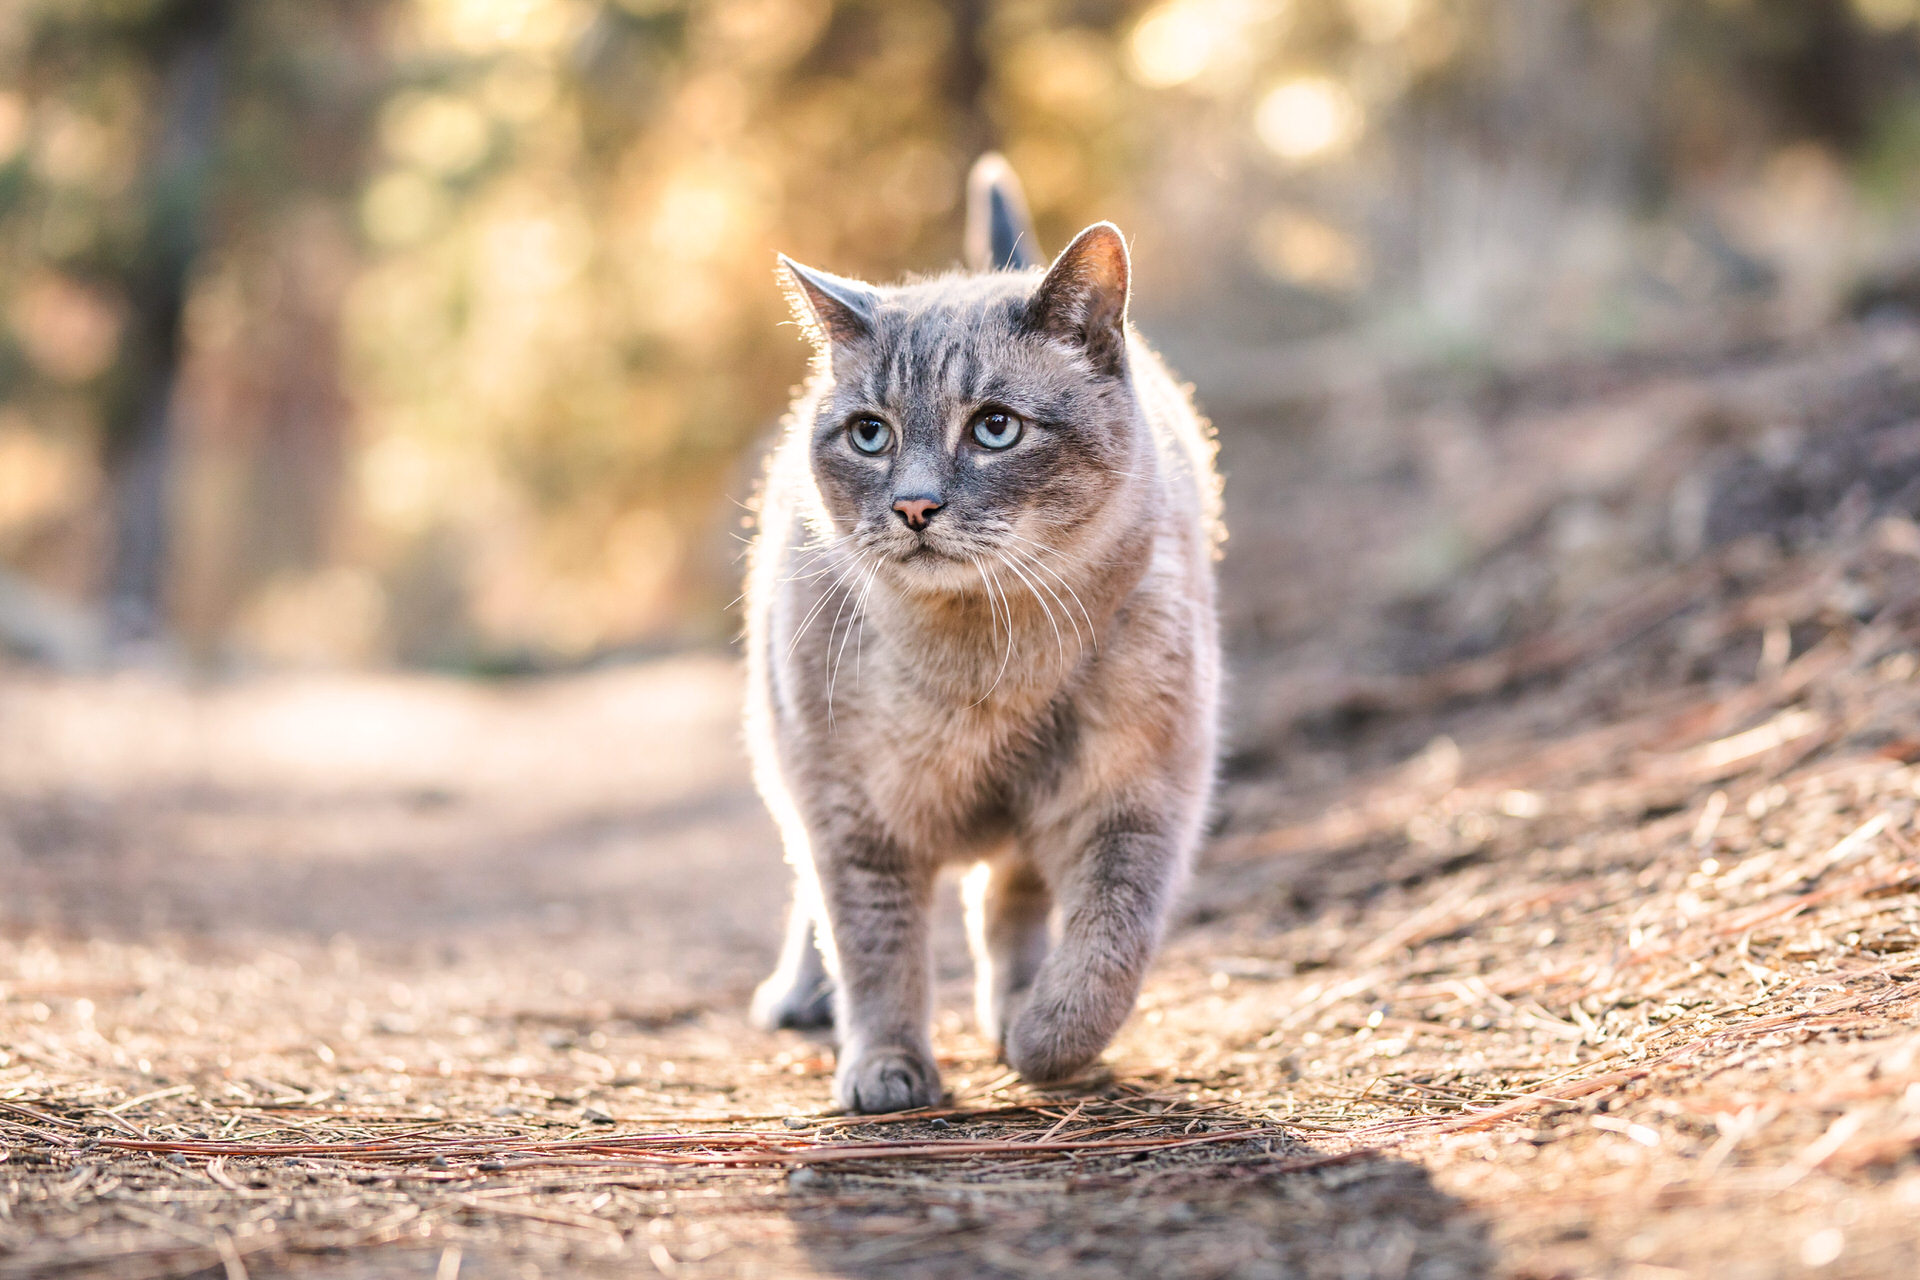 Gray cat walking outdoors on trail.